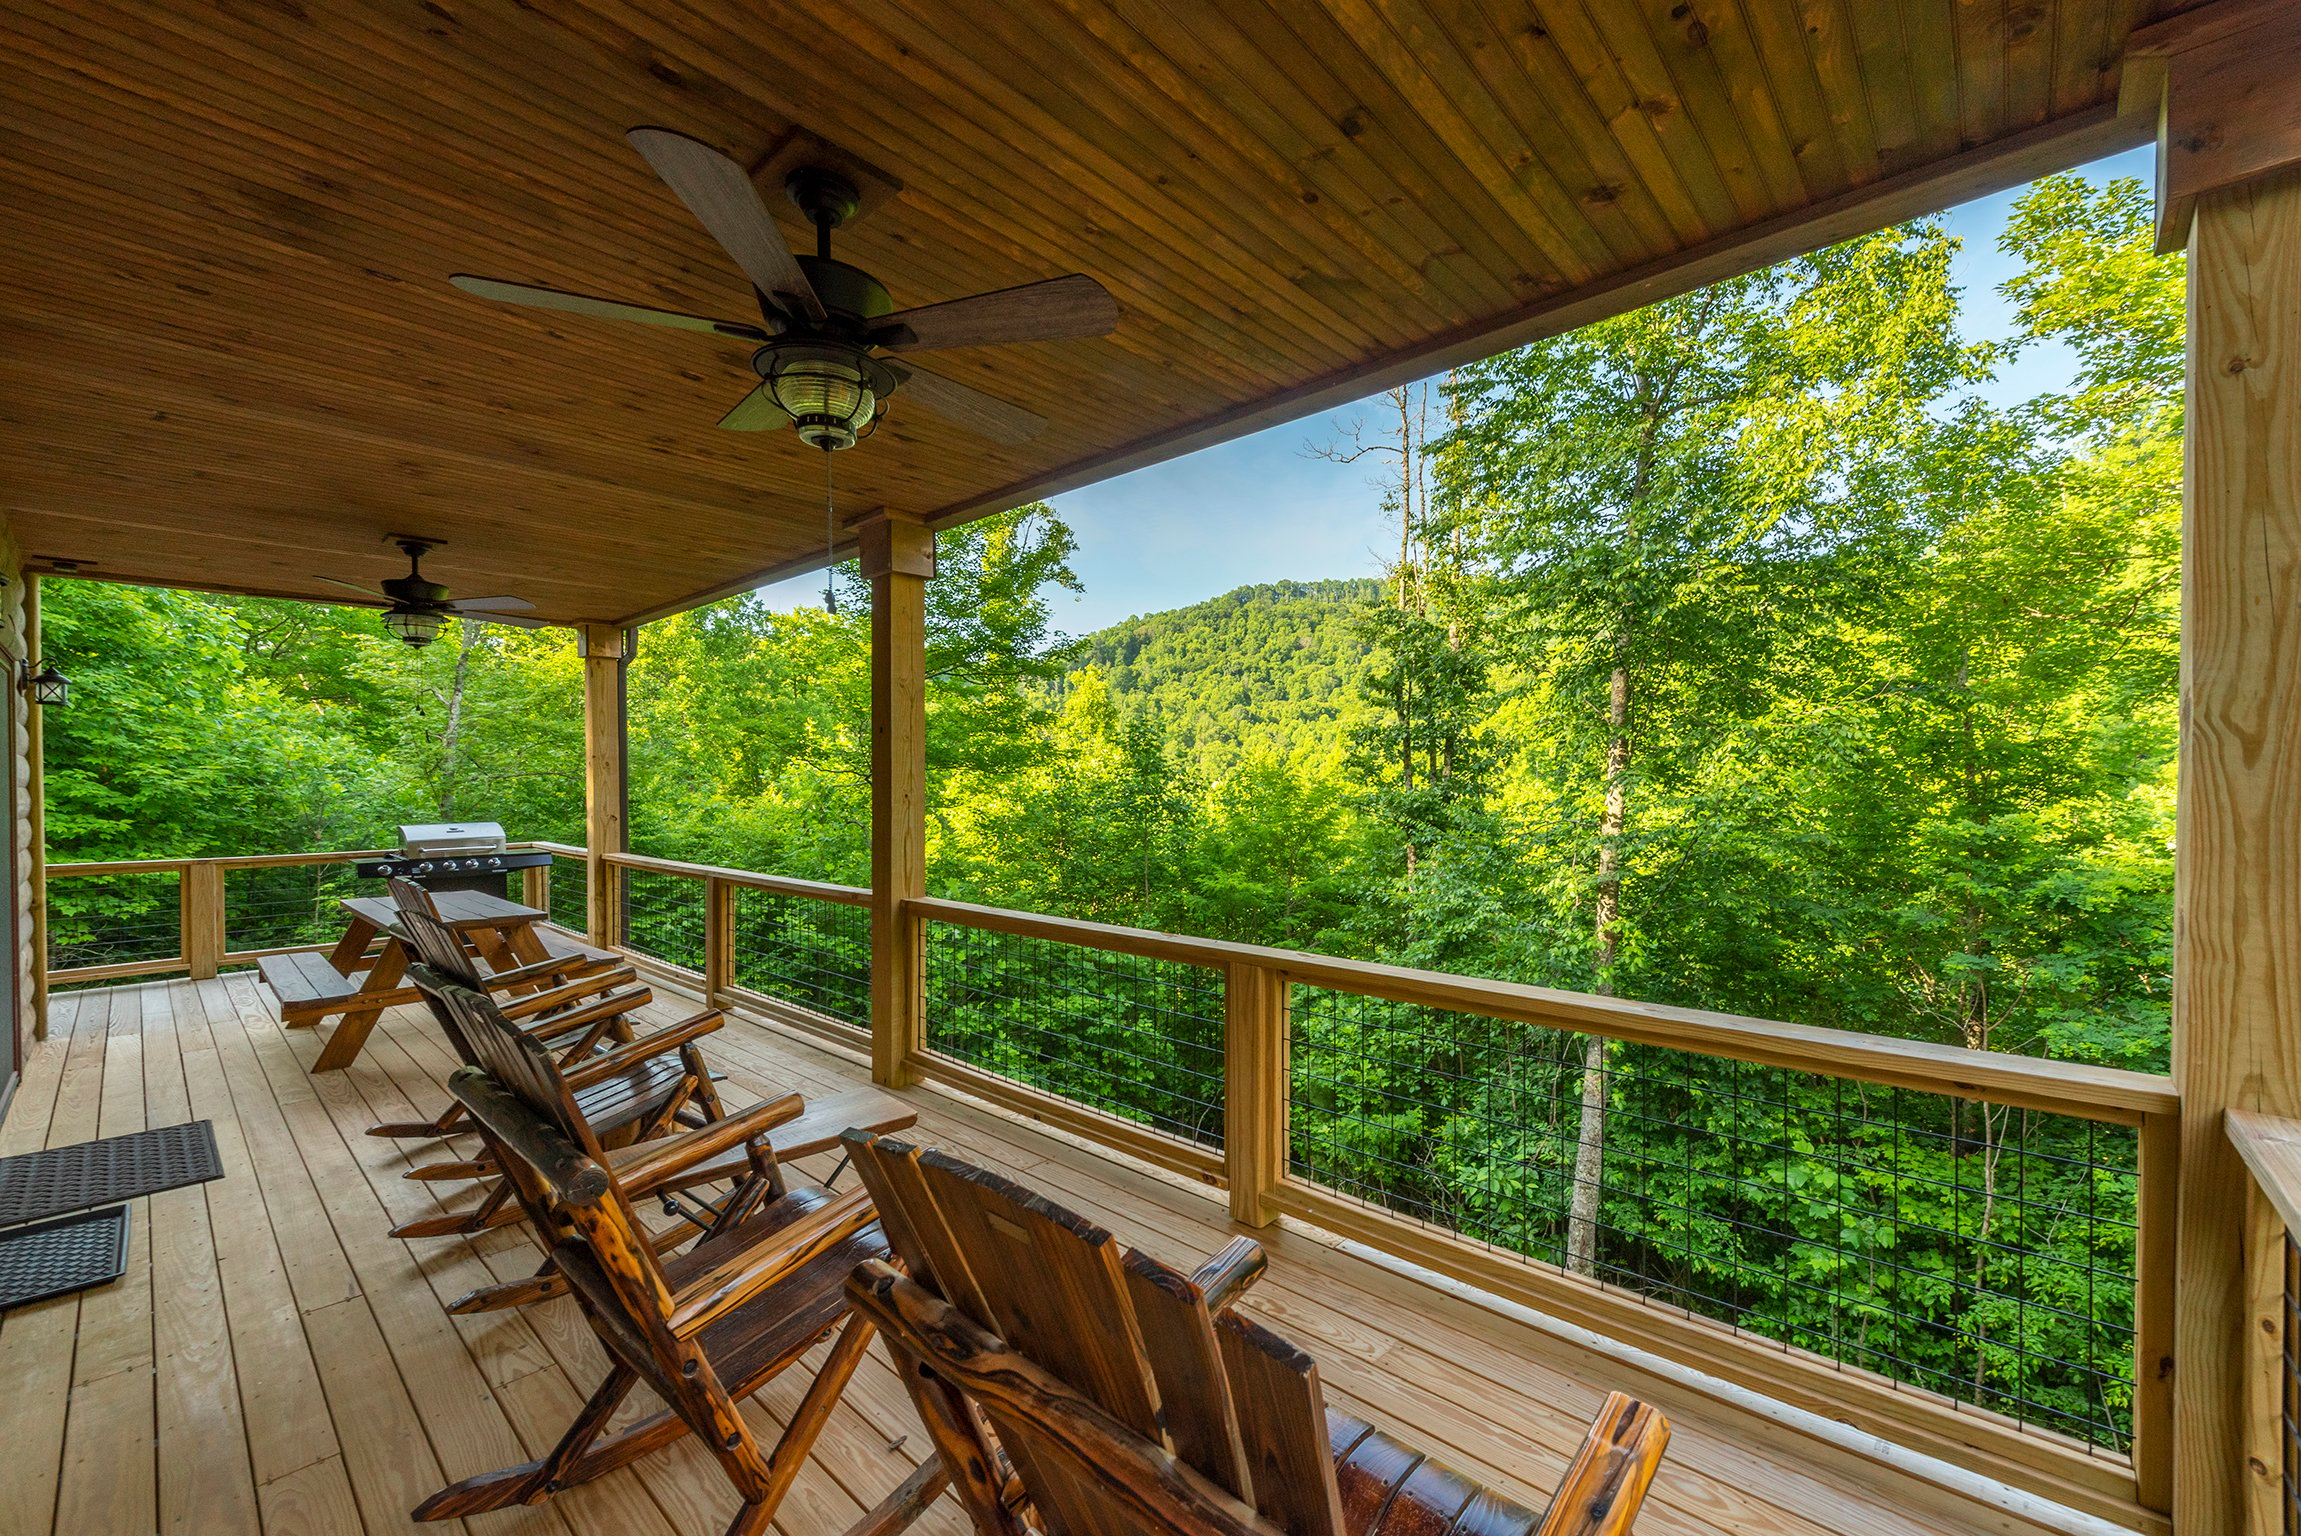 Enjoy your morning coffee with mountain views on the back deck!